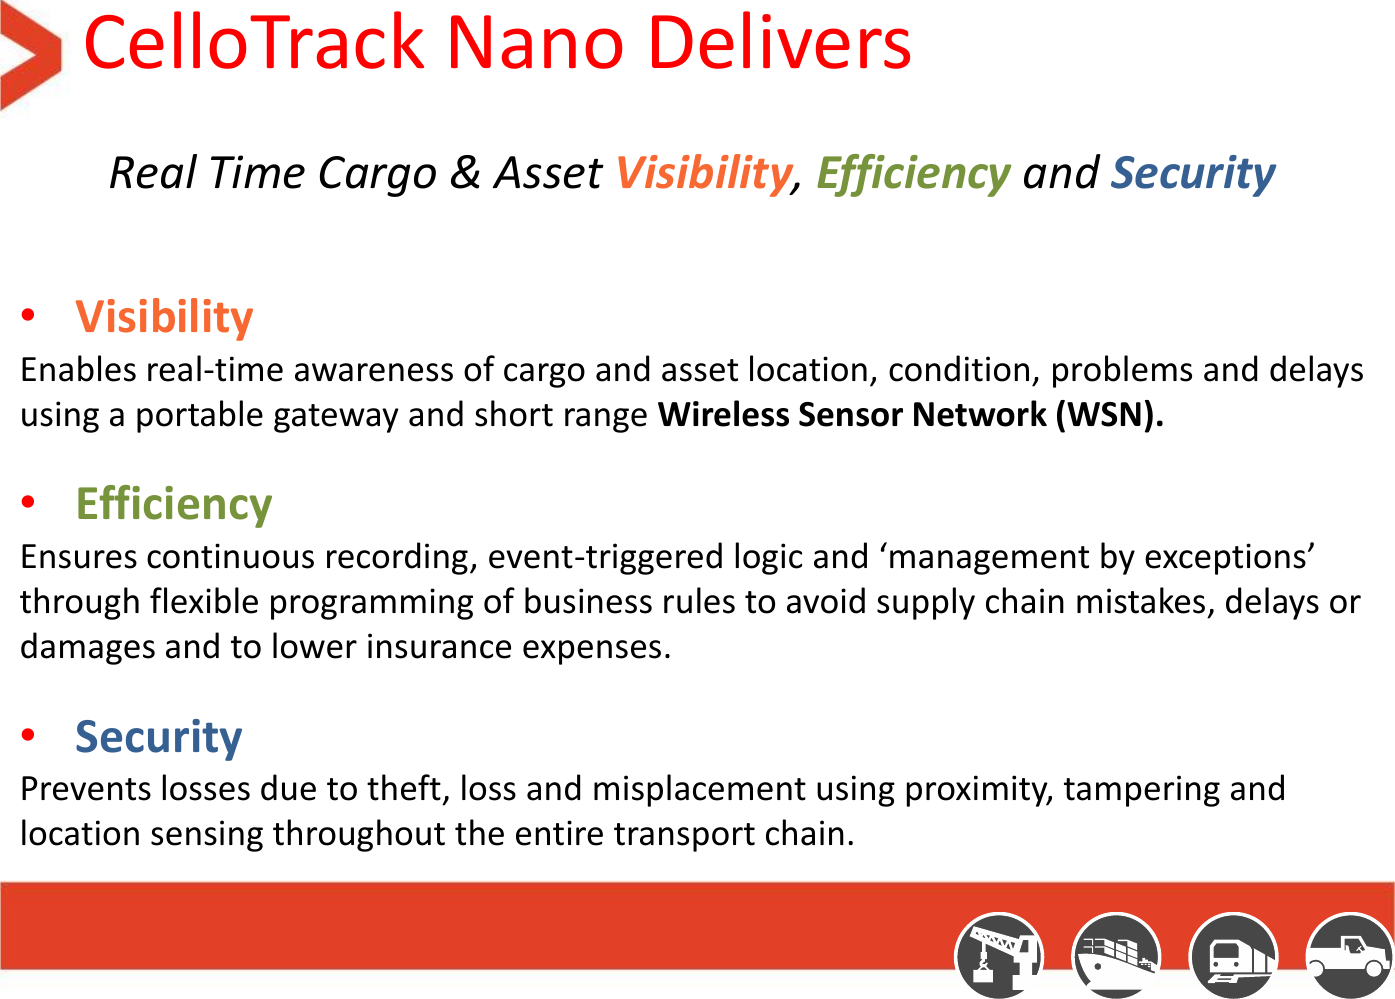 CelloTrack Nano Delivers Real Time Cargo &amp; Asset Visibility, Efficiency and Security  •Visibility  Enables real-time awareness of cargo and asset location, condition, problems and delays using a portable gateway and short range Wireless Sensor Network (WSN). •Efficiency Ensures continuous recording, event-triggered logic and ‘management by exceptions’ through flexible programming of business rules to avoid supply chain mistakes, delays or damages and to lower insurance expenses.  •Security  Prevents losses due to theft, loss and misplacement using proximity, tampering and location sensing throughout the entire transport chain.  